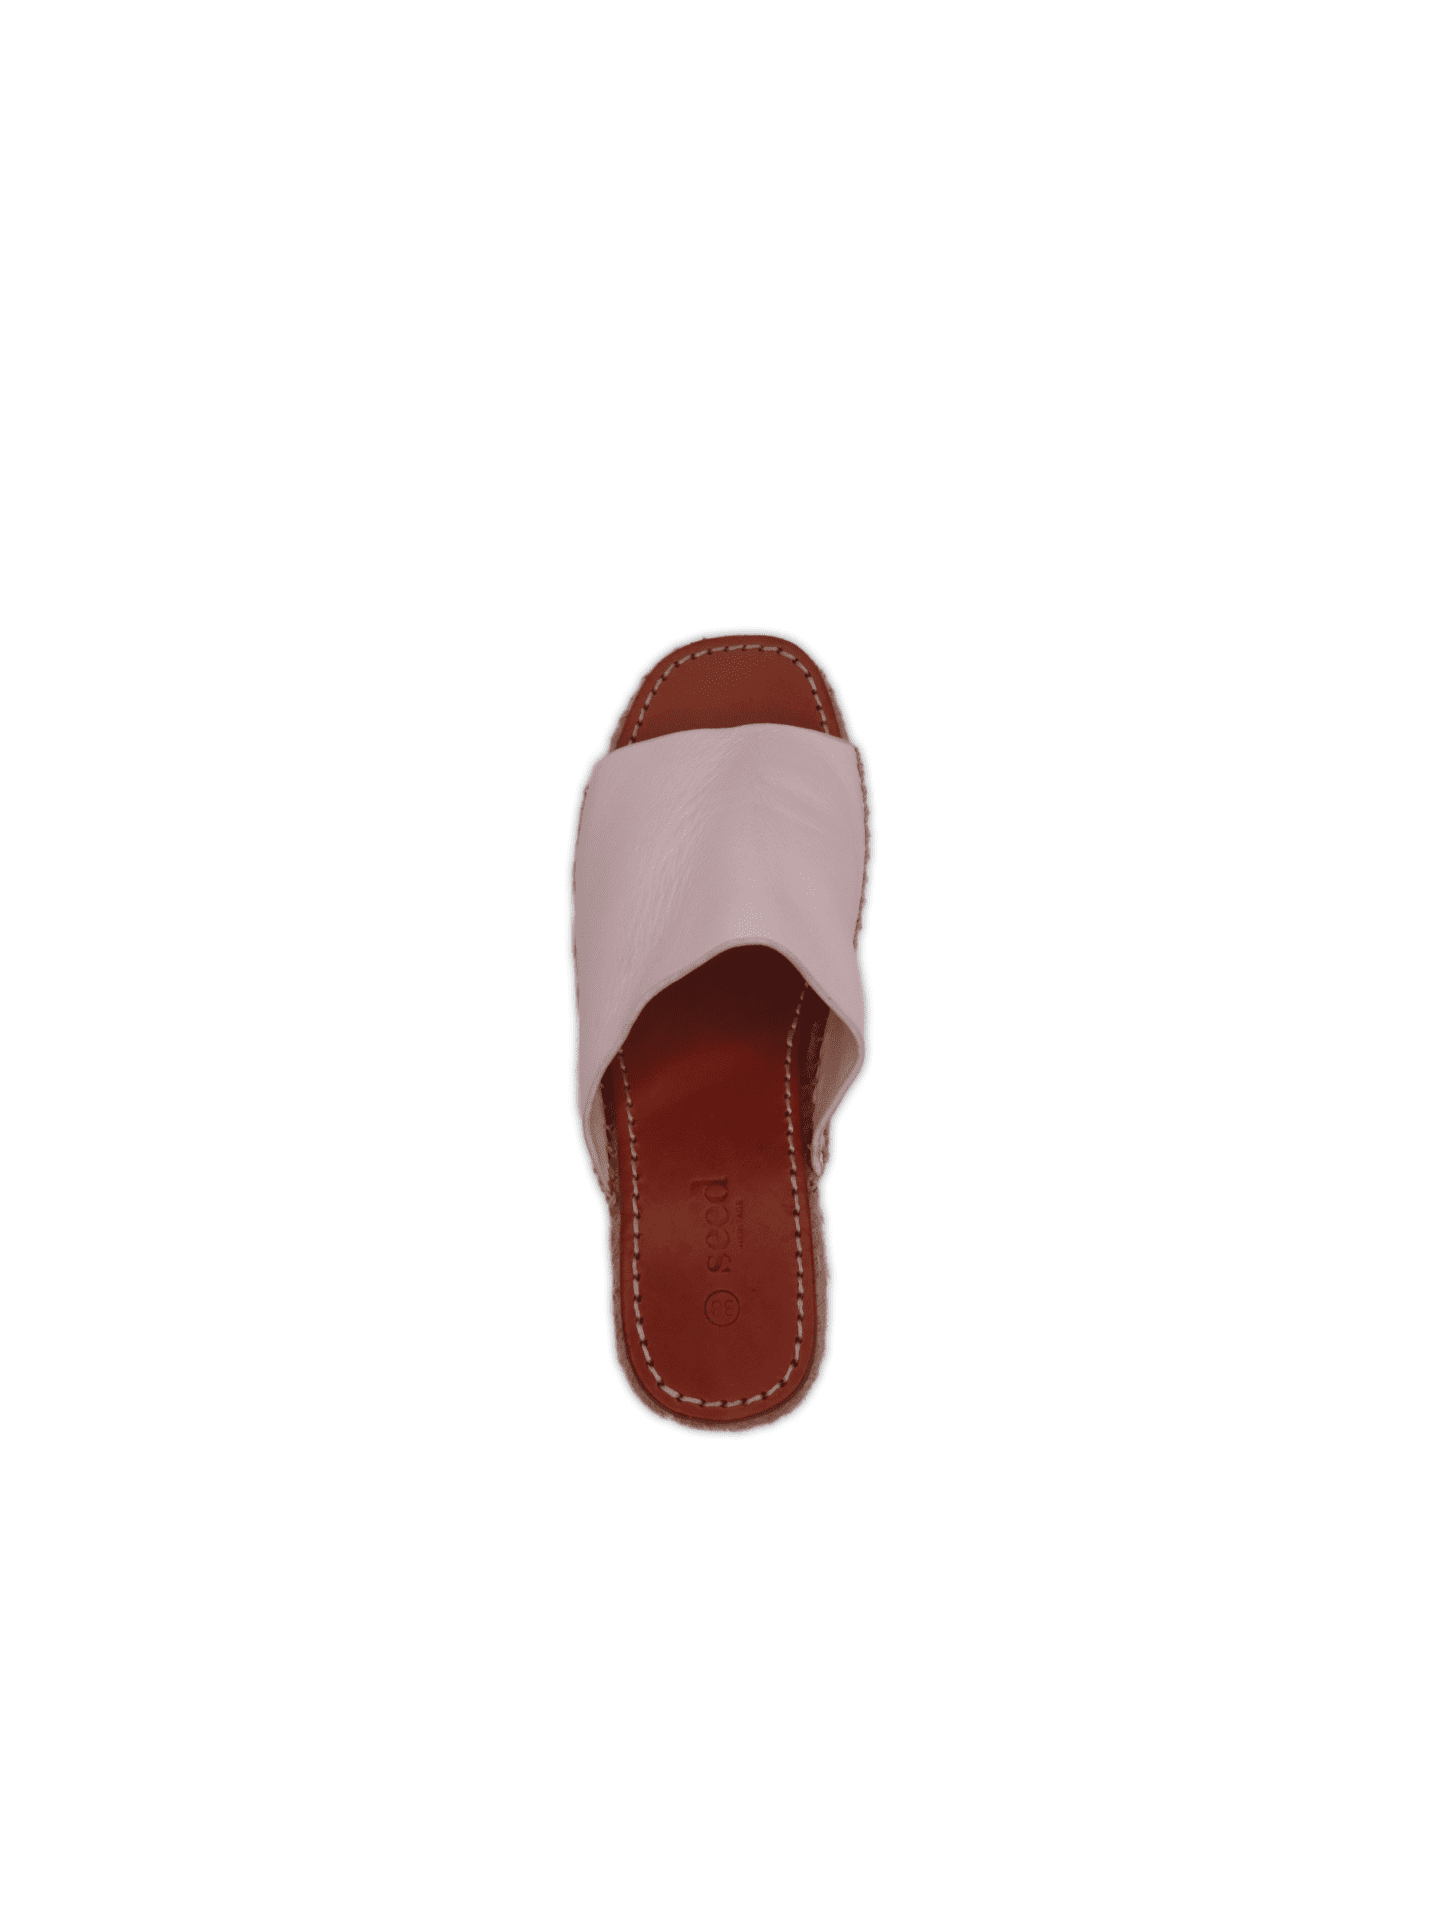 Espadrille wedge slides, featuring a brown insole with blanket stitching and a white strap. Perfect for summer or a holiday! Slides are made from PU leather and fabric. White and Brown in colour and are a size EU 38 / NZ 7.